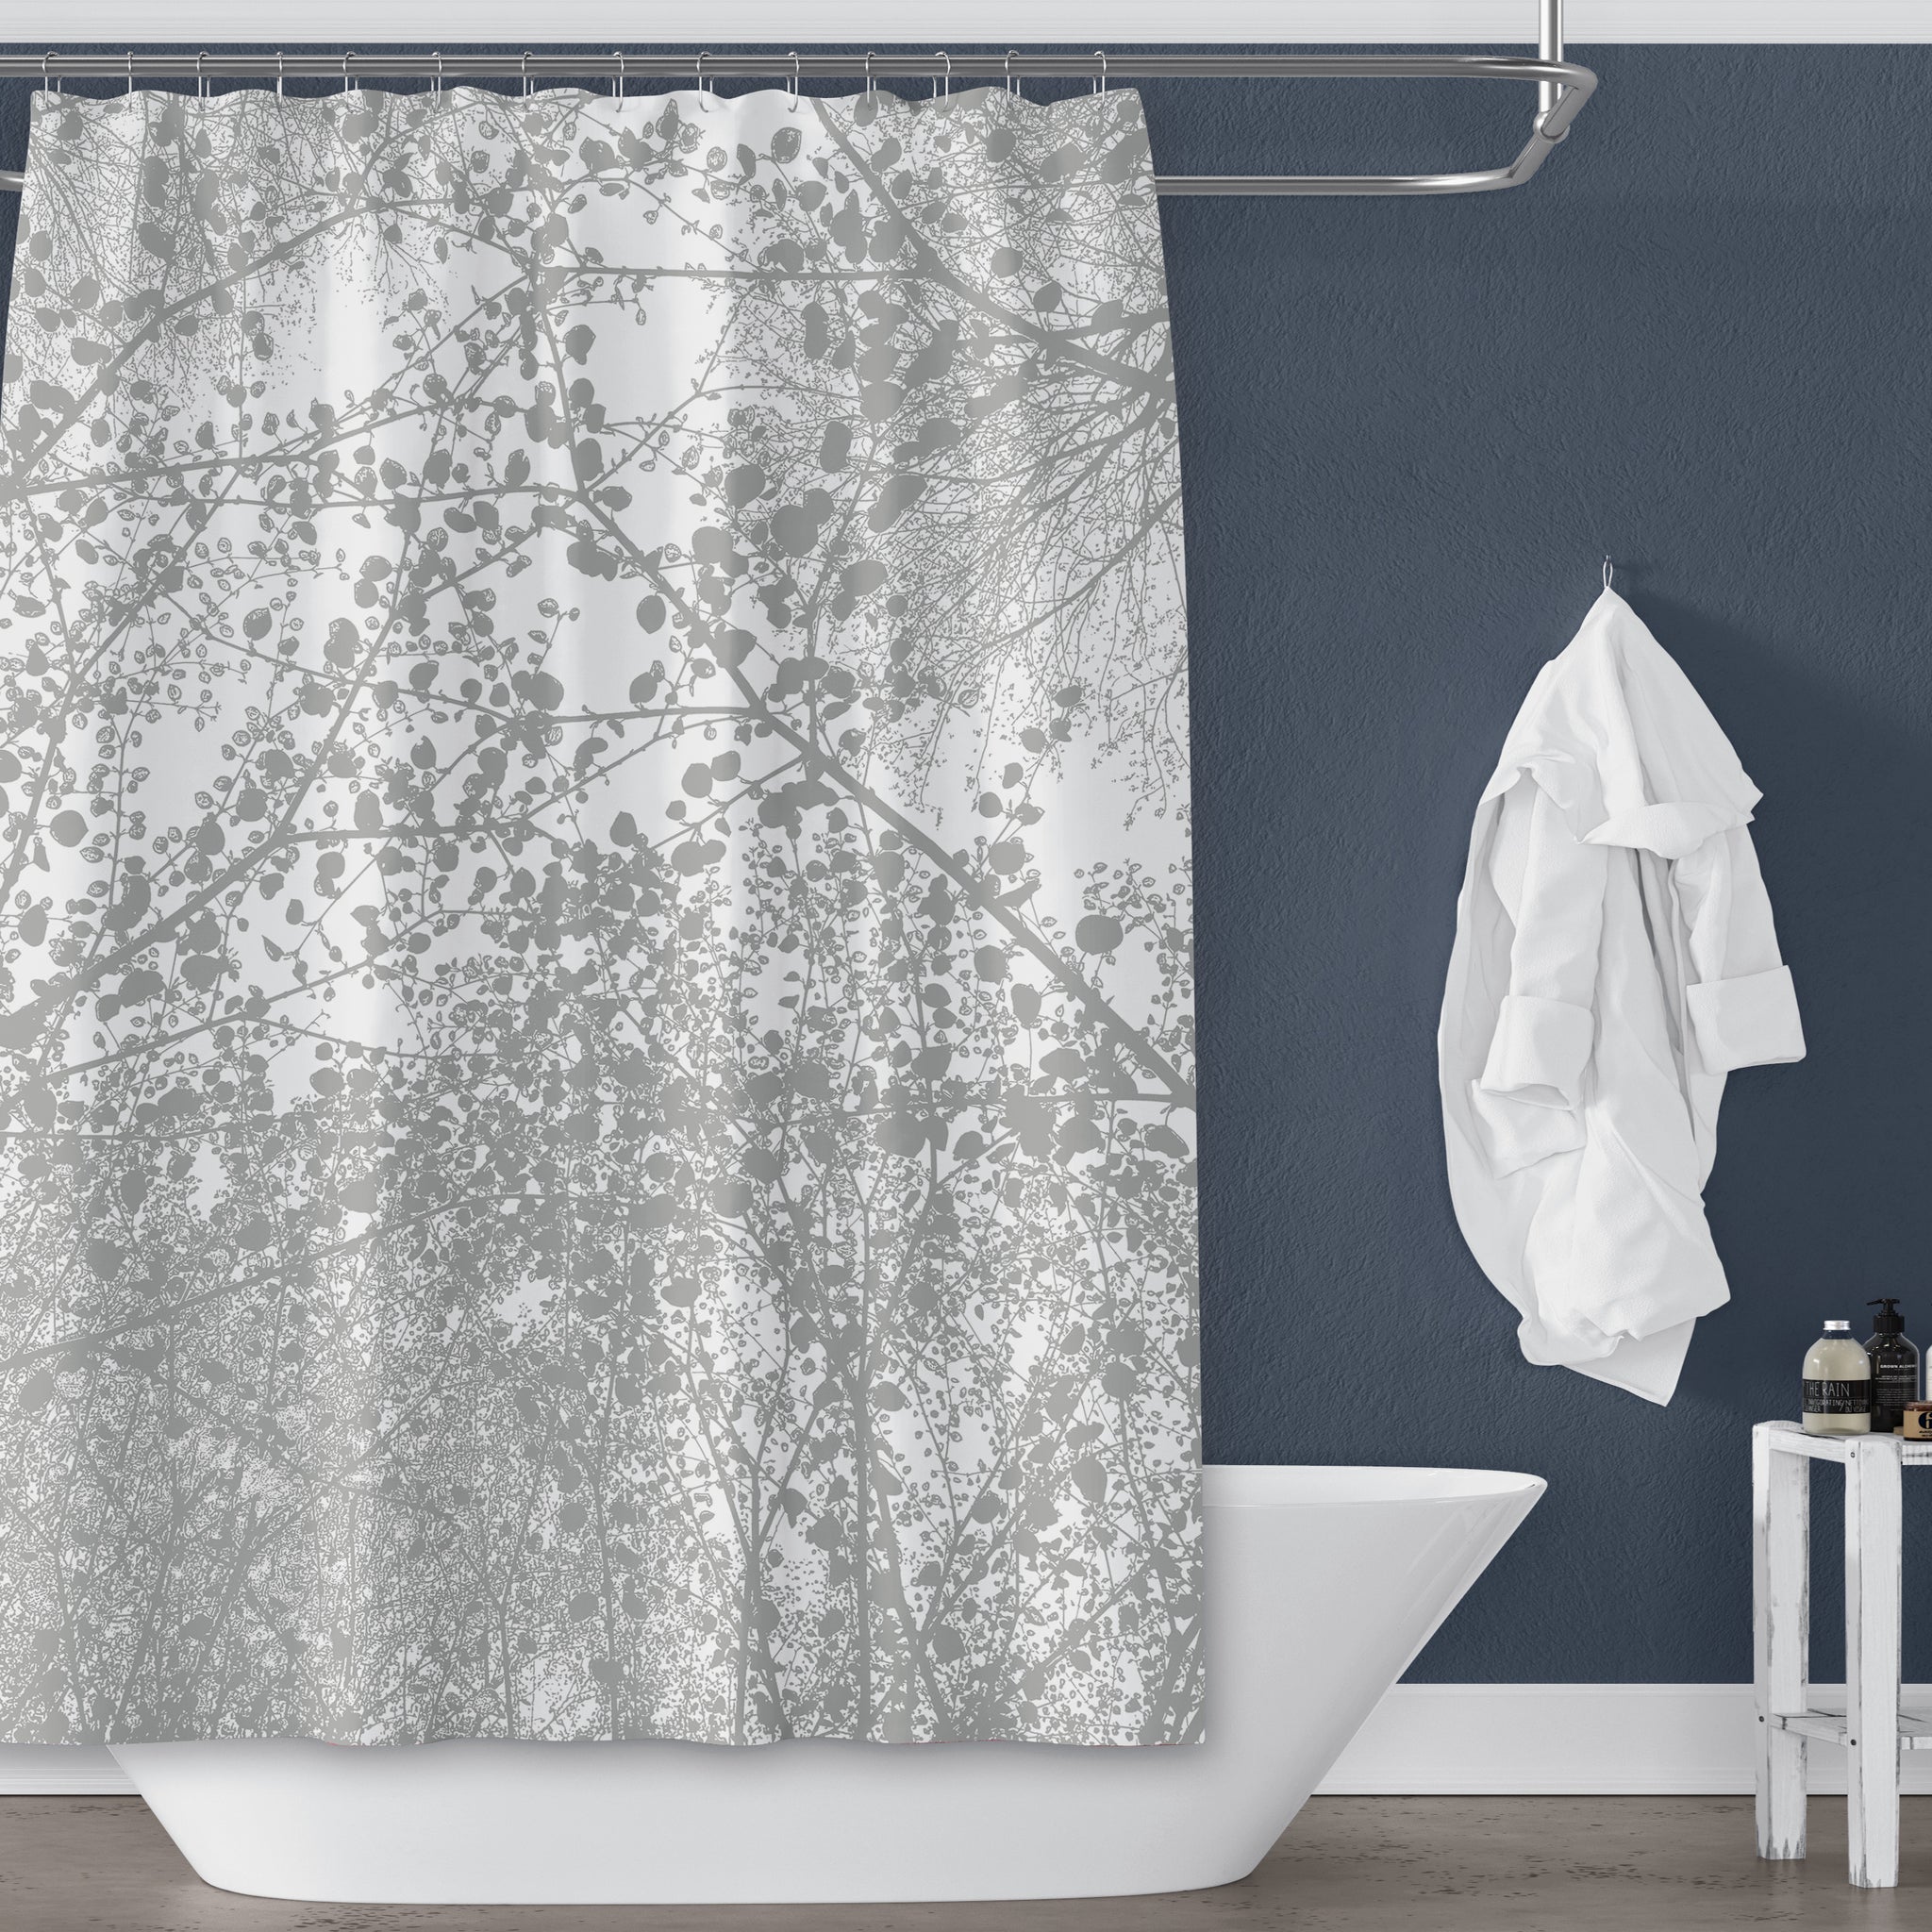 Spring Trees Overhead Silhouette, Gray on White Shower Curtain - Metro Shower Curtains